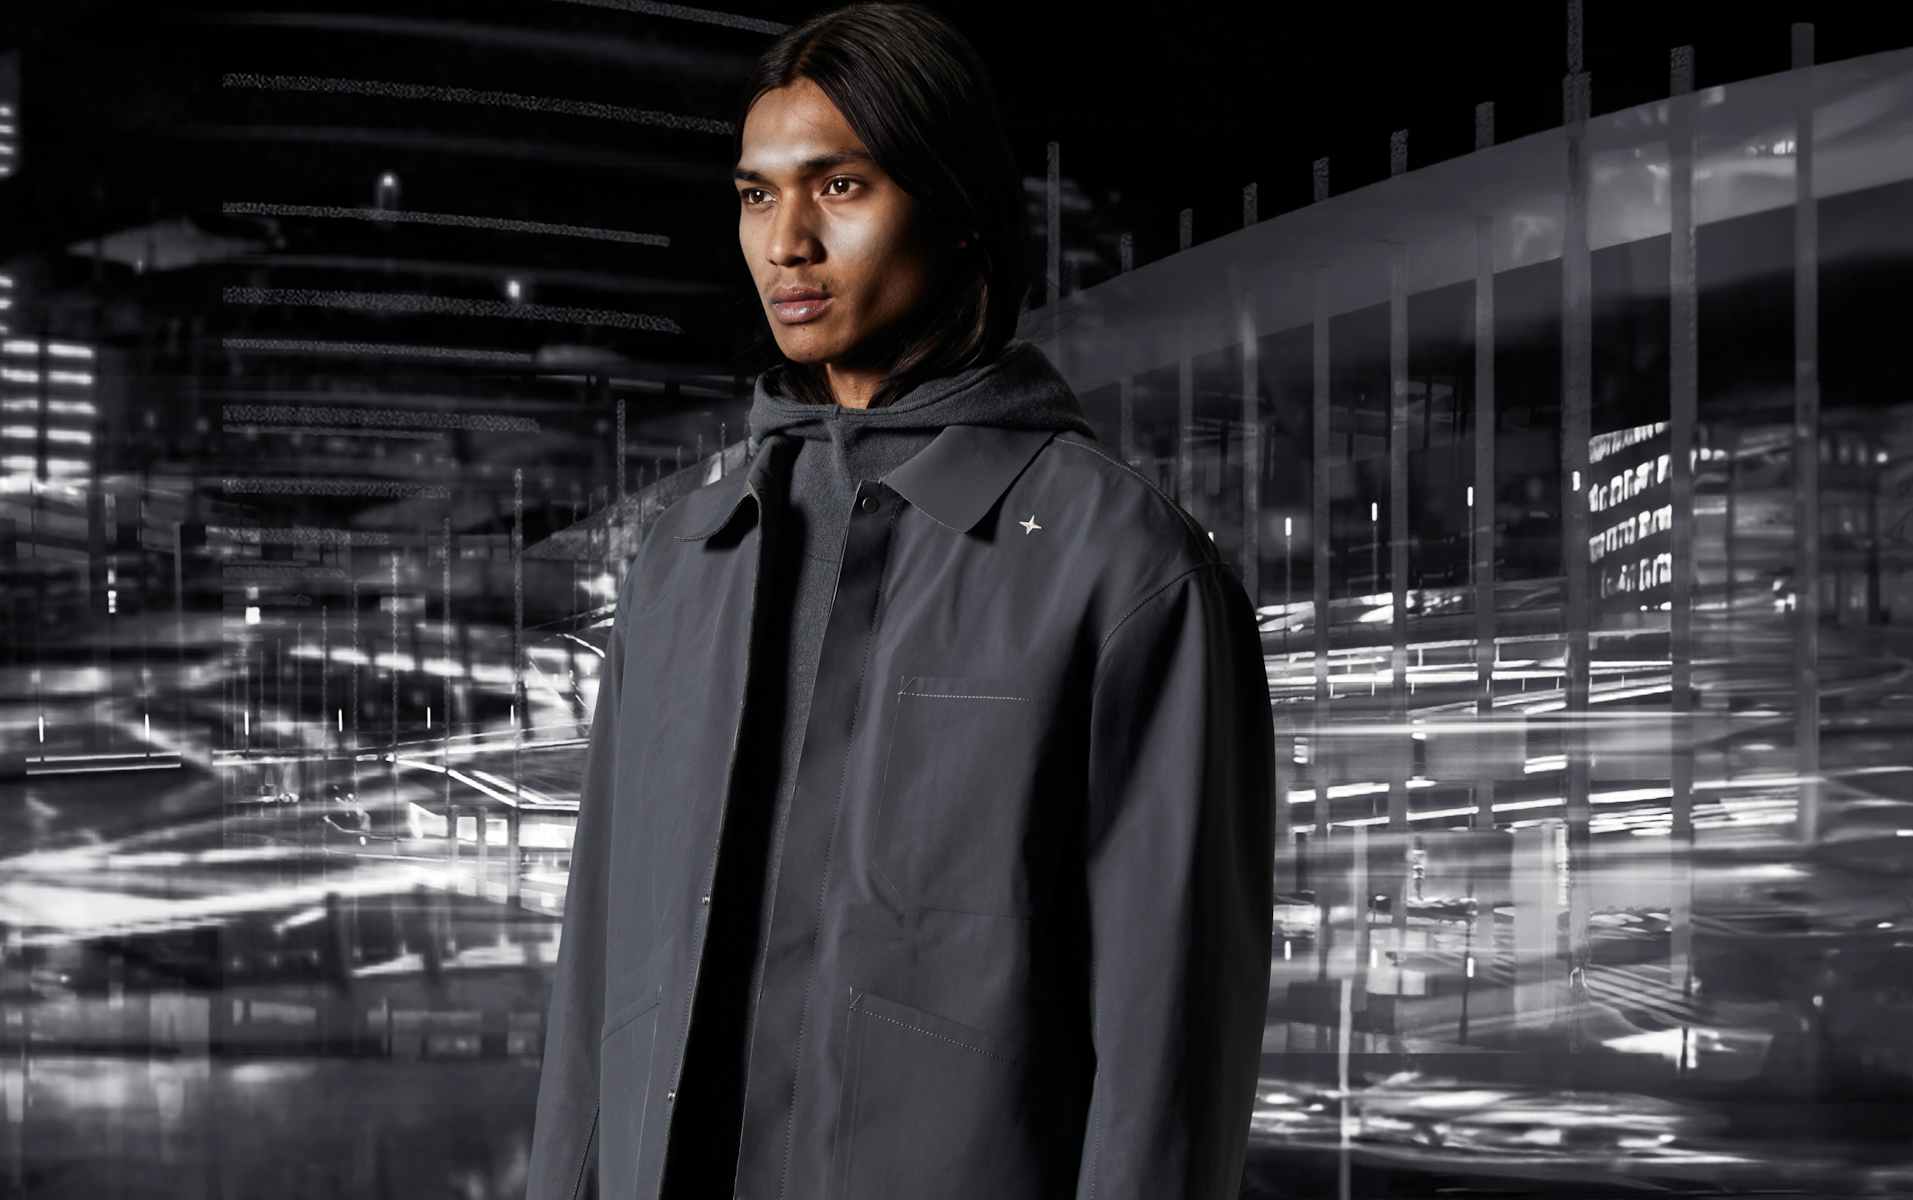 STONE ISLAND BECOMES AN OFFICIAL PARTNER OF FRIEZE